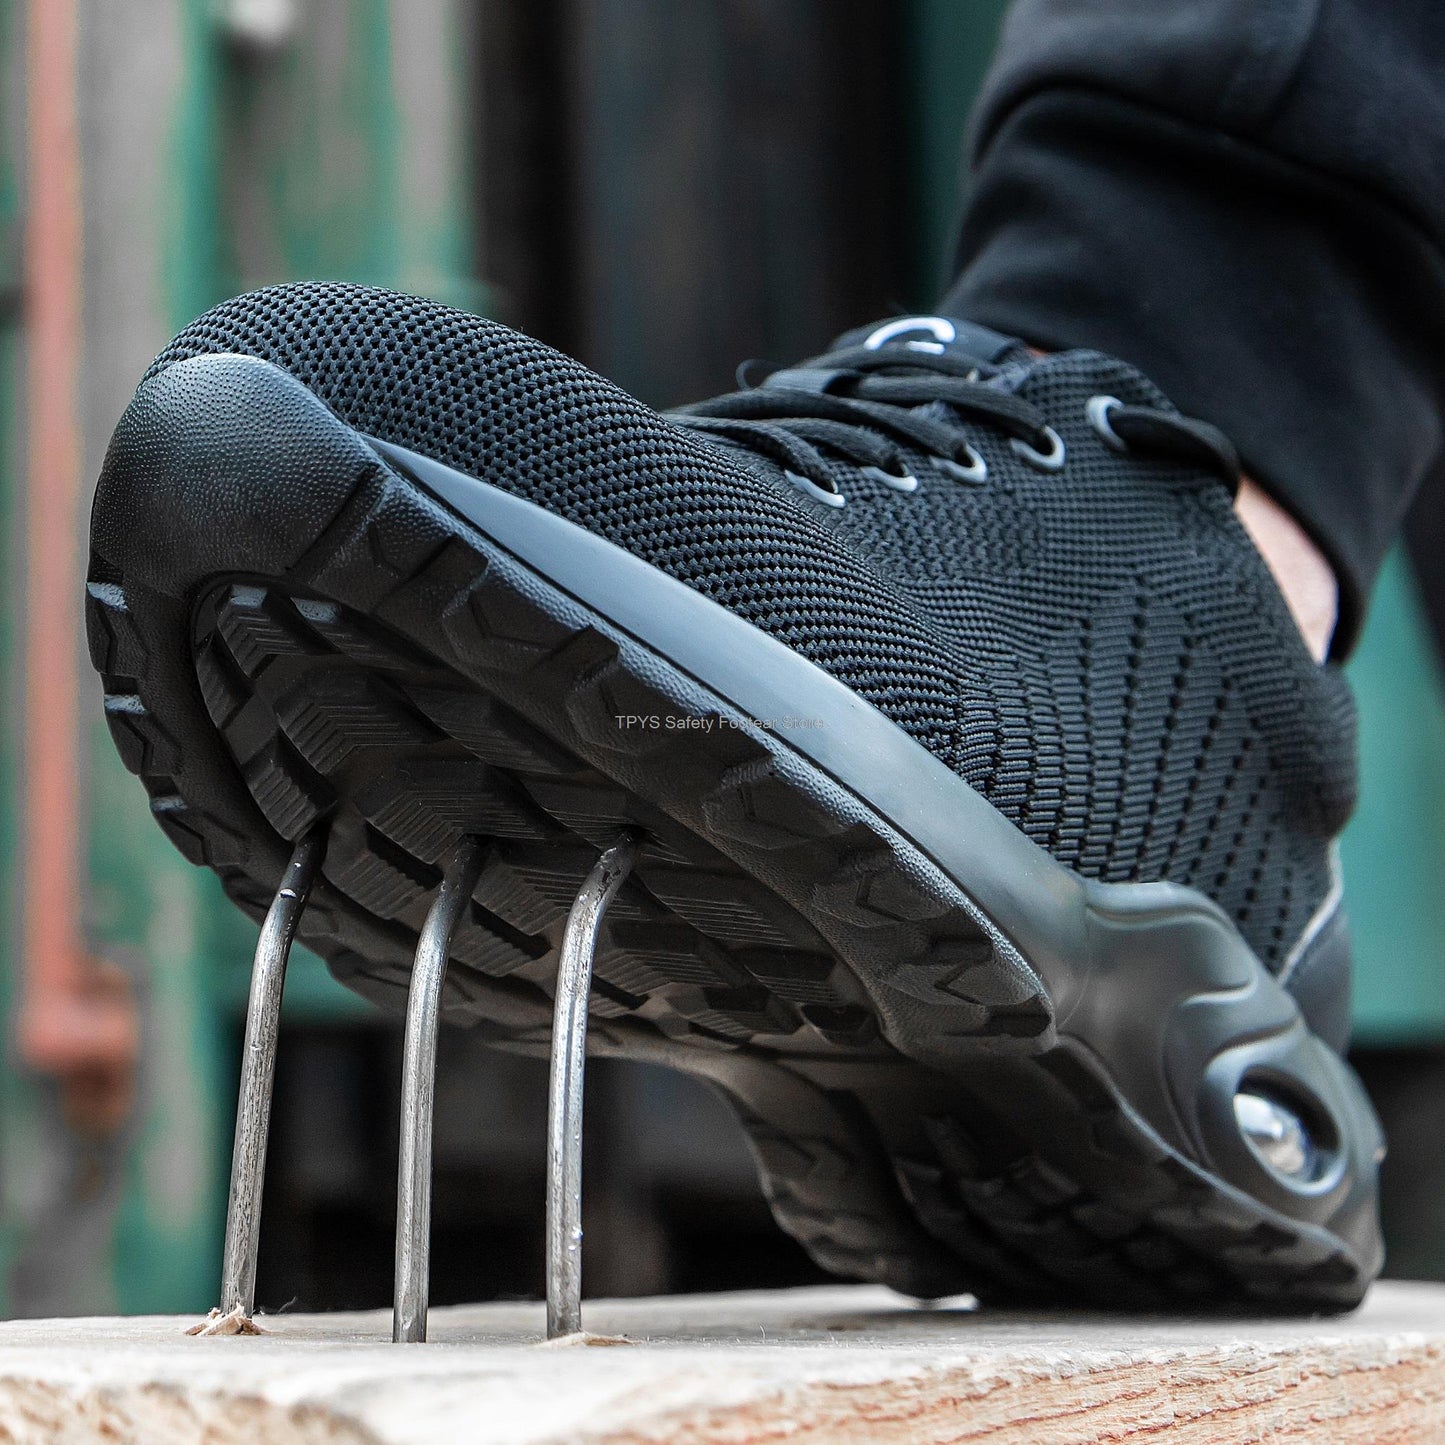 Puncture Proof Safety Shoes for Men